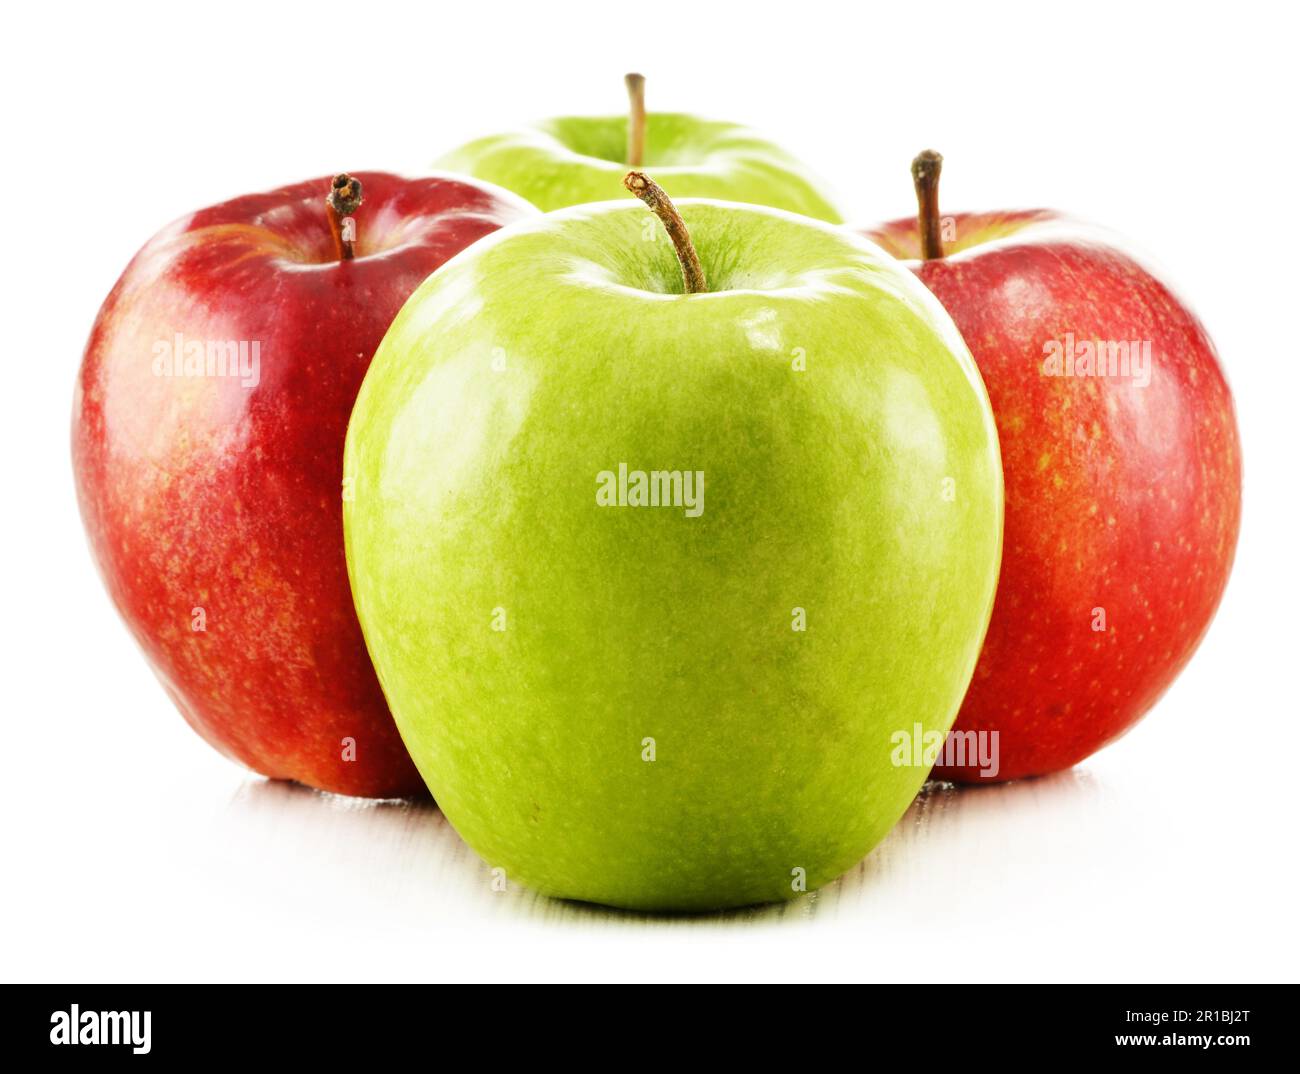 Composition with four apples over white background Stock Photo